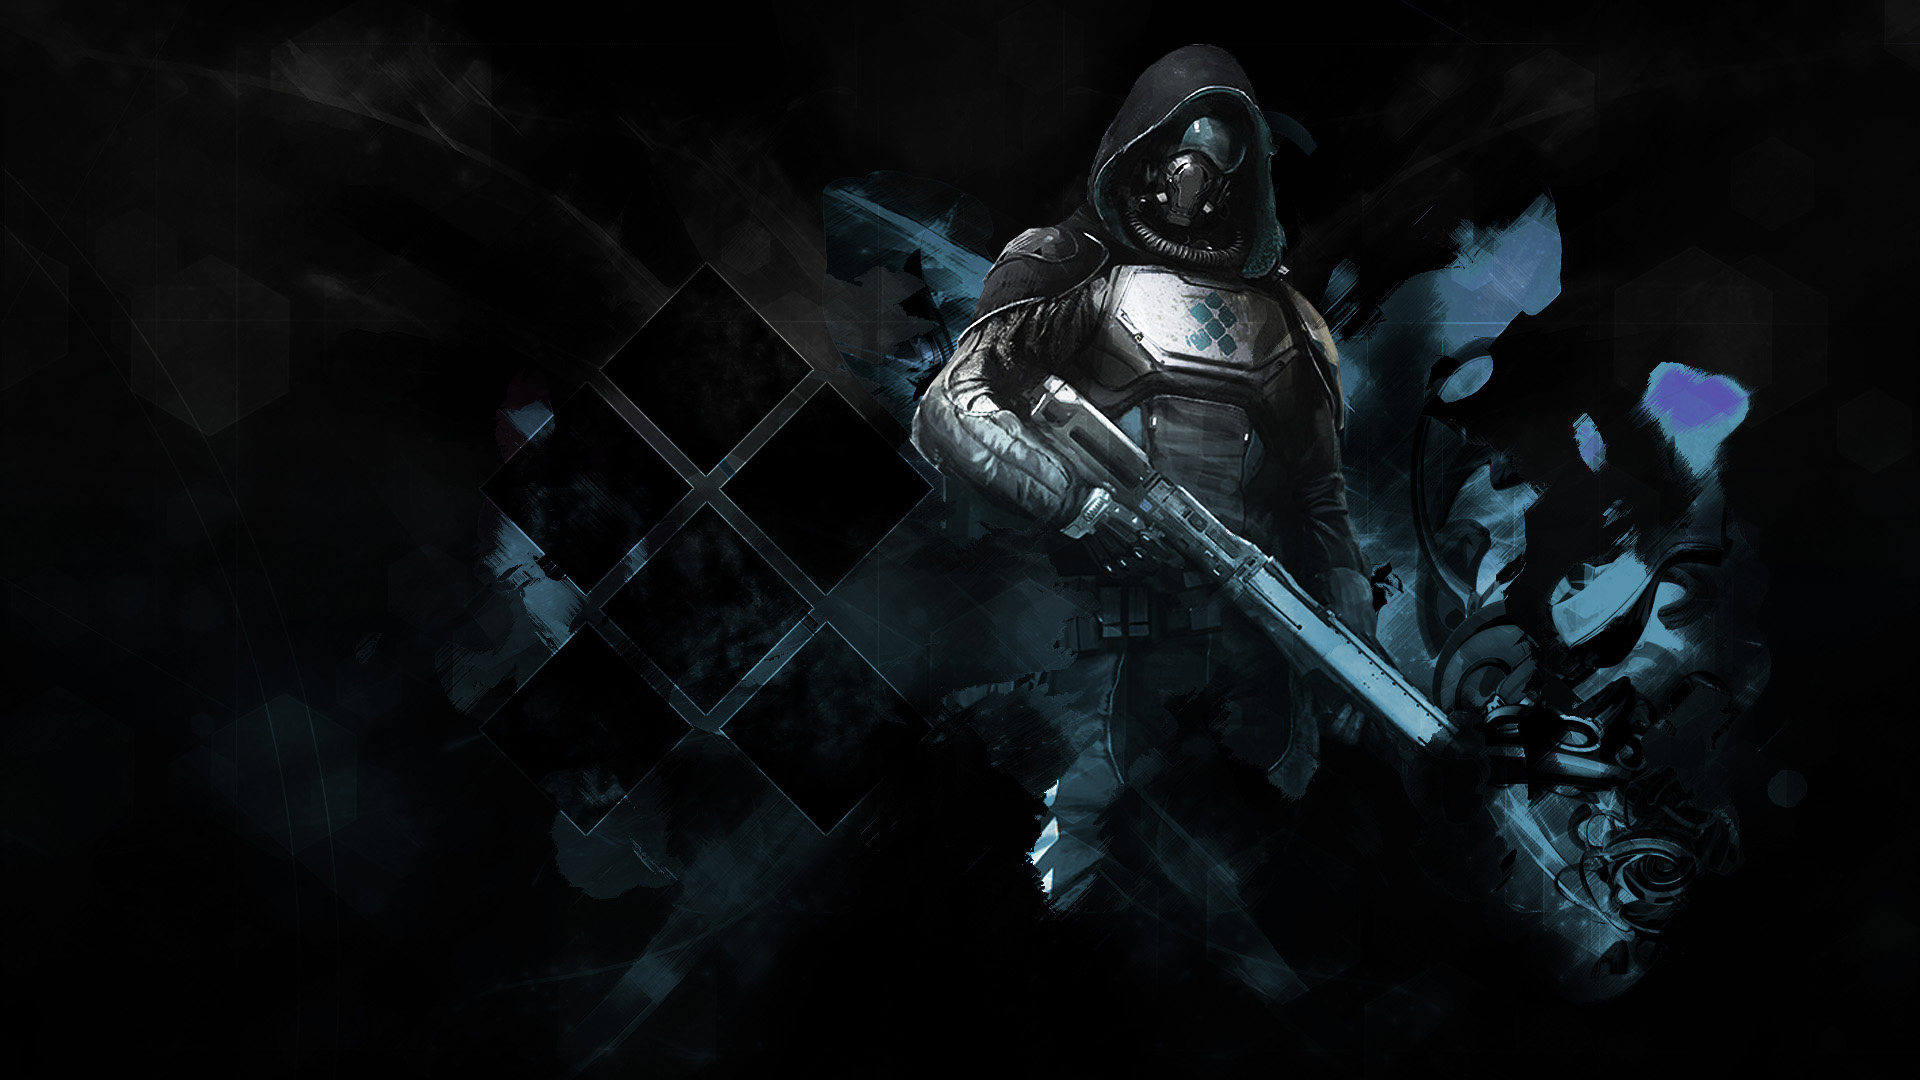 Stunning destiny game wallpapers, Action-packed gameplay, Epic battles, Powerful characters, 1920x1080 Full HD Desktop